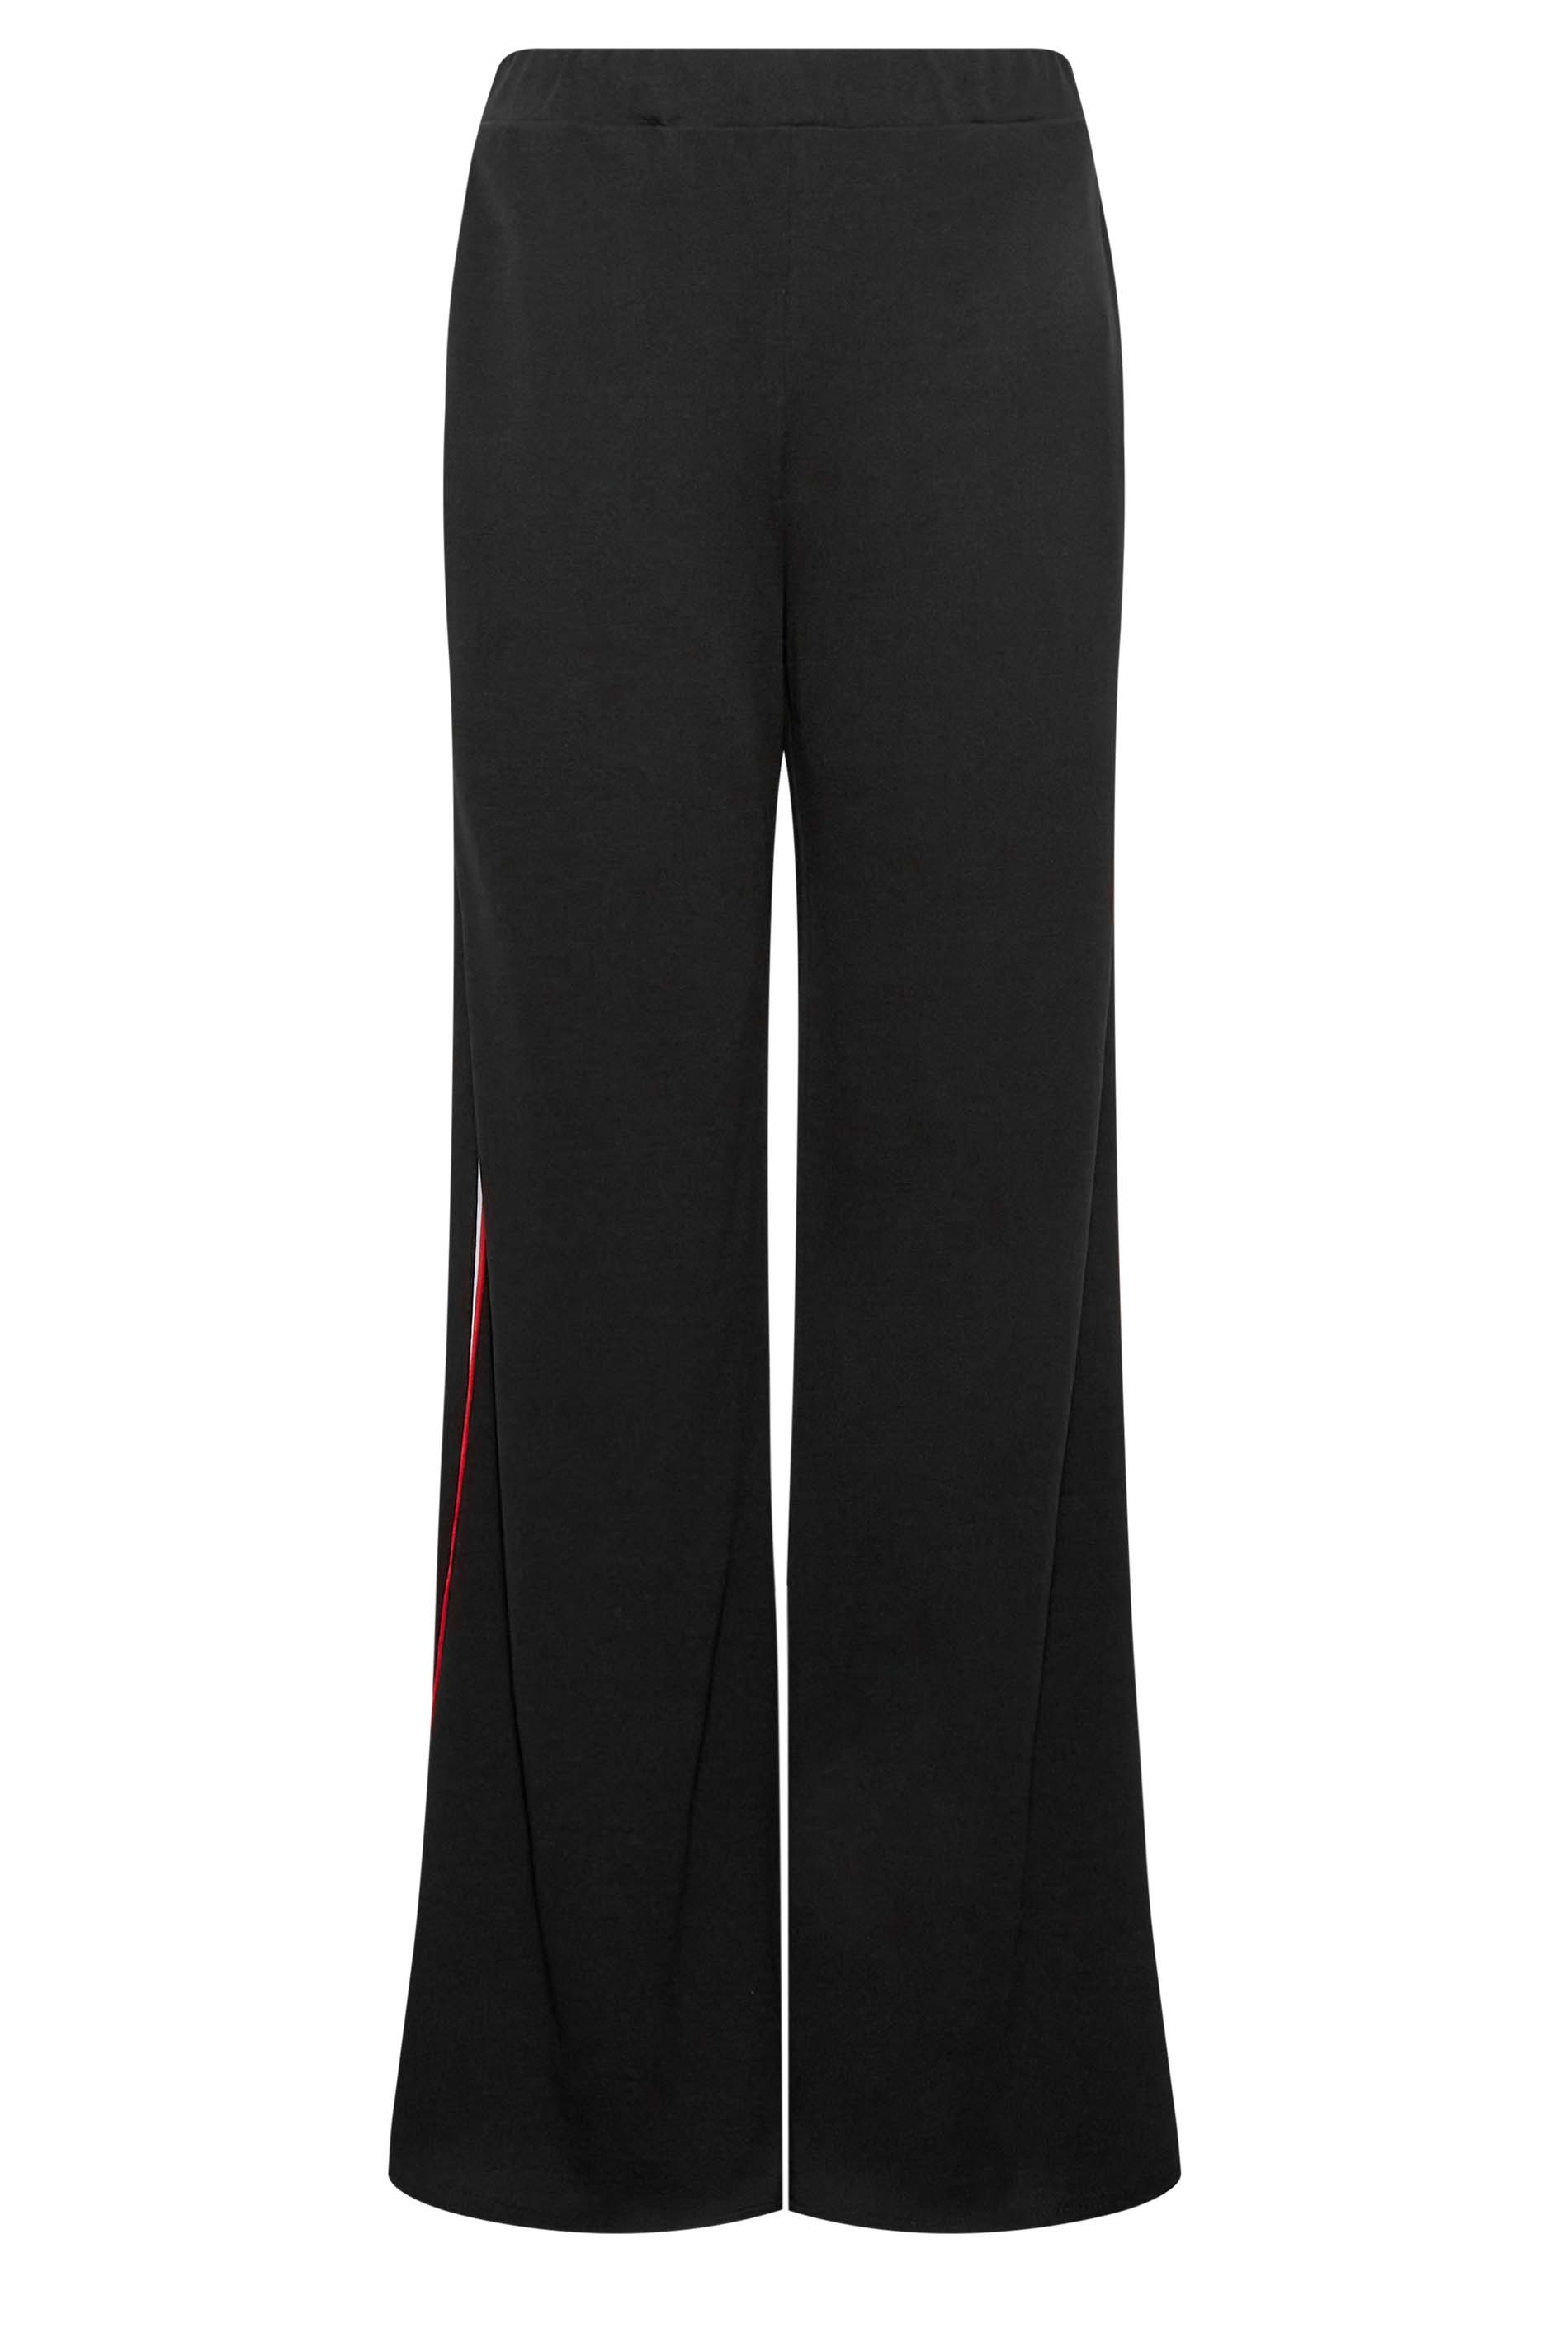 LTS Tall Women's Black & Red Side Stripe Trousers | Long Tall Sally